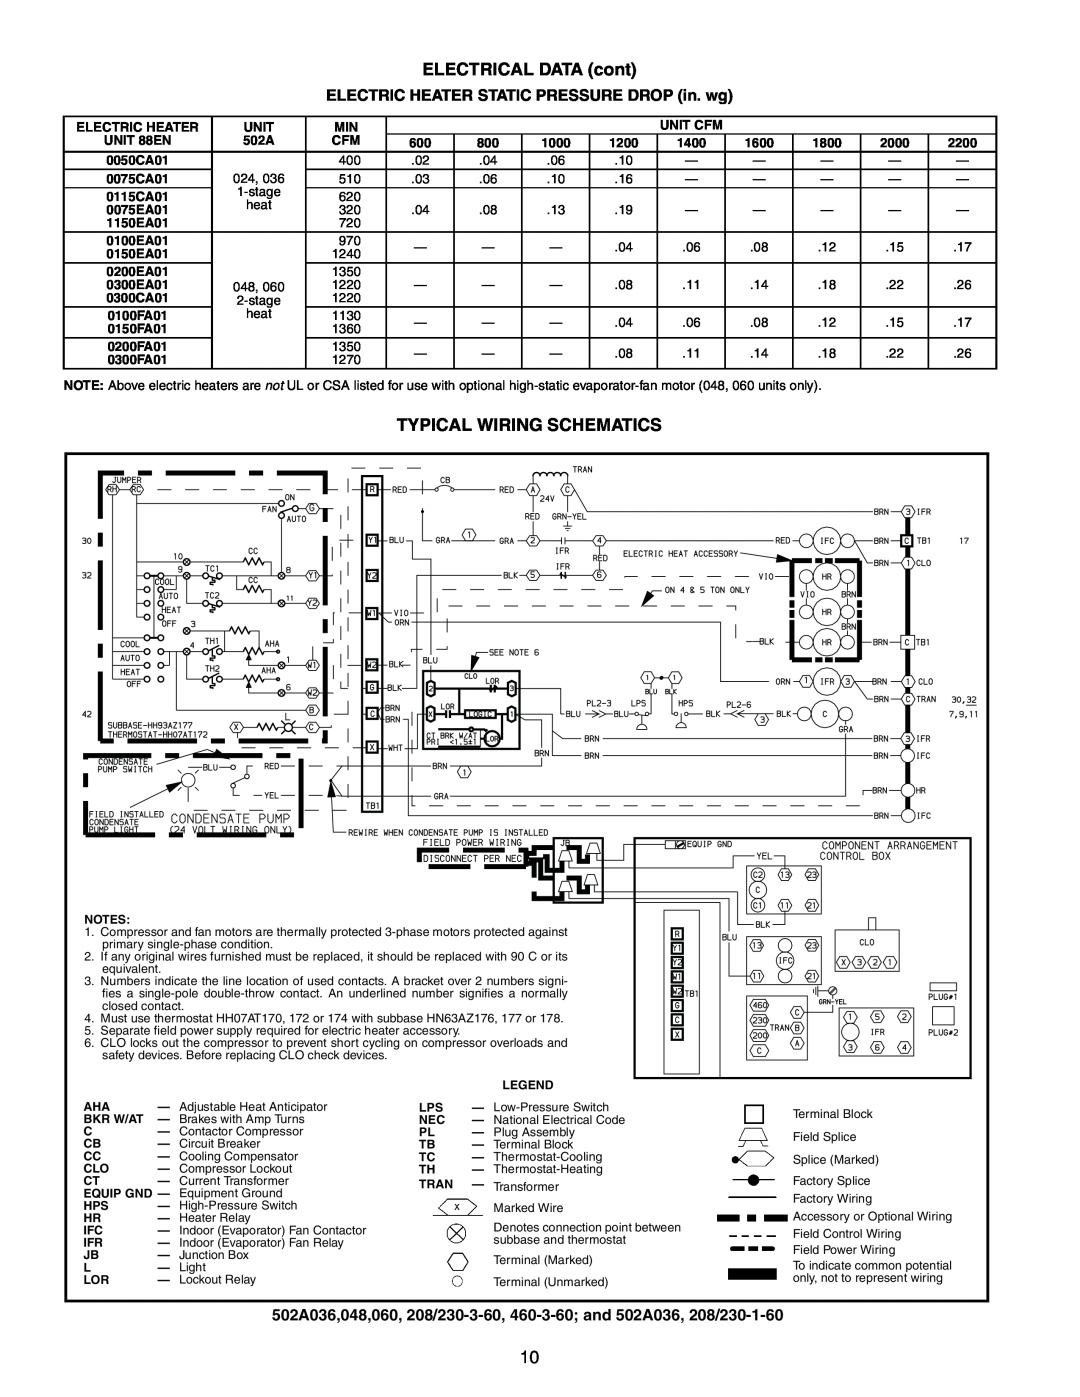 Bryant 502A ELECTRICAL DATA cont, Typical Wiring Schematics, ELECTRIC HEATER STATIC PRESSURE DROP in. wg, Electric Heater 